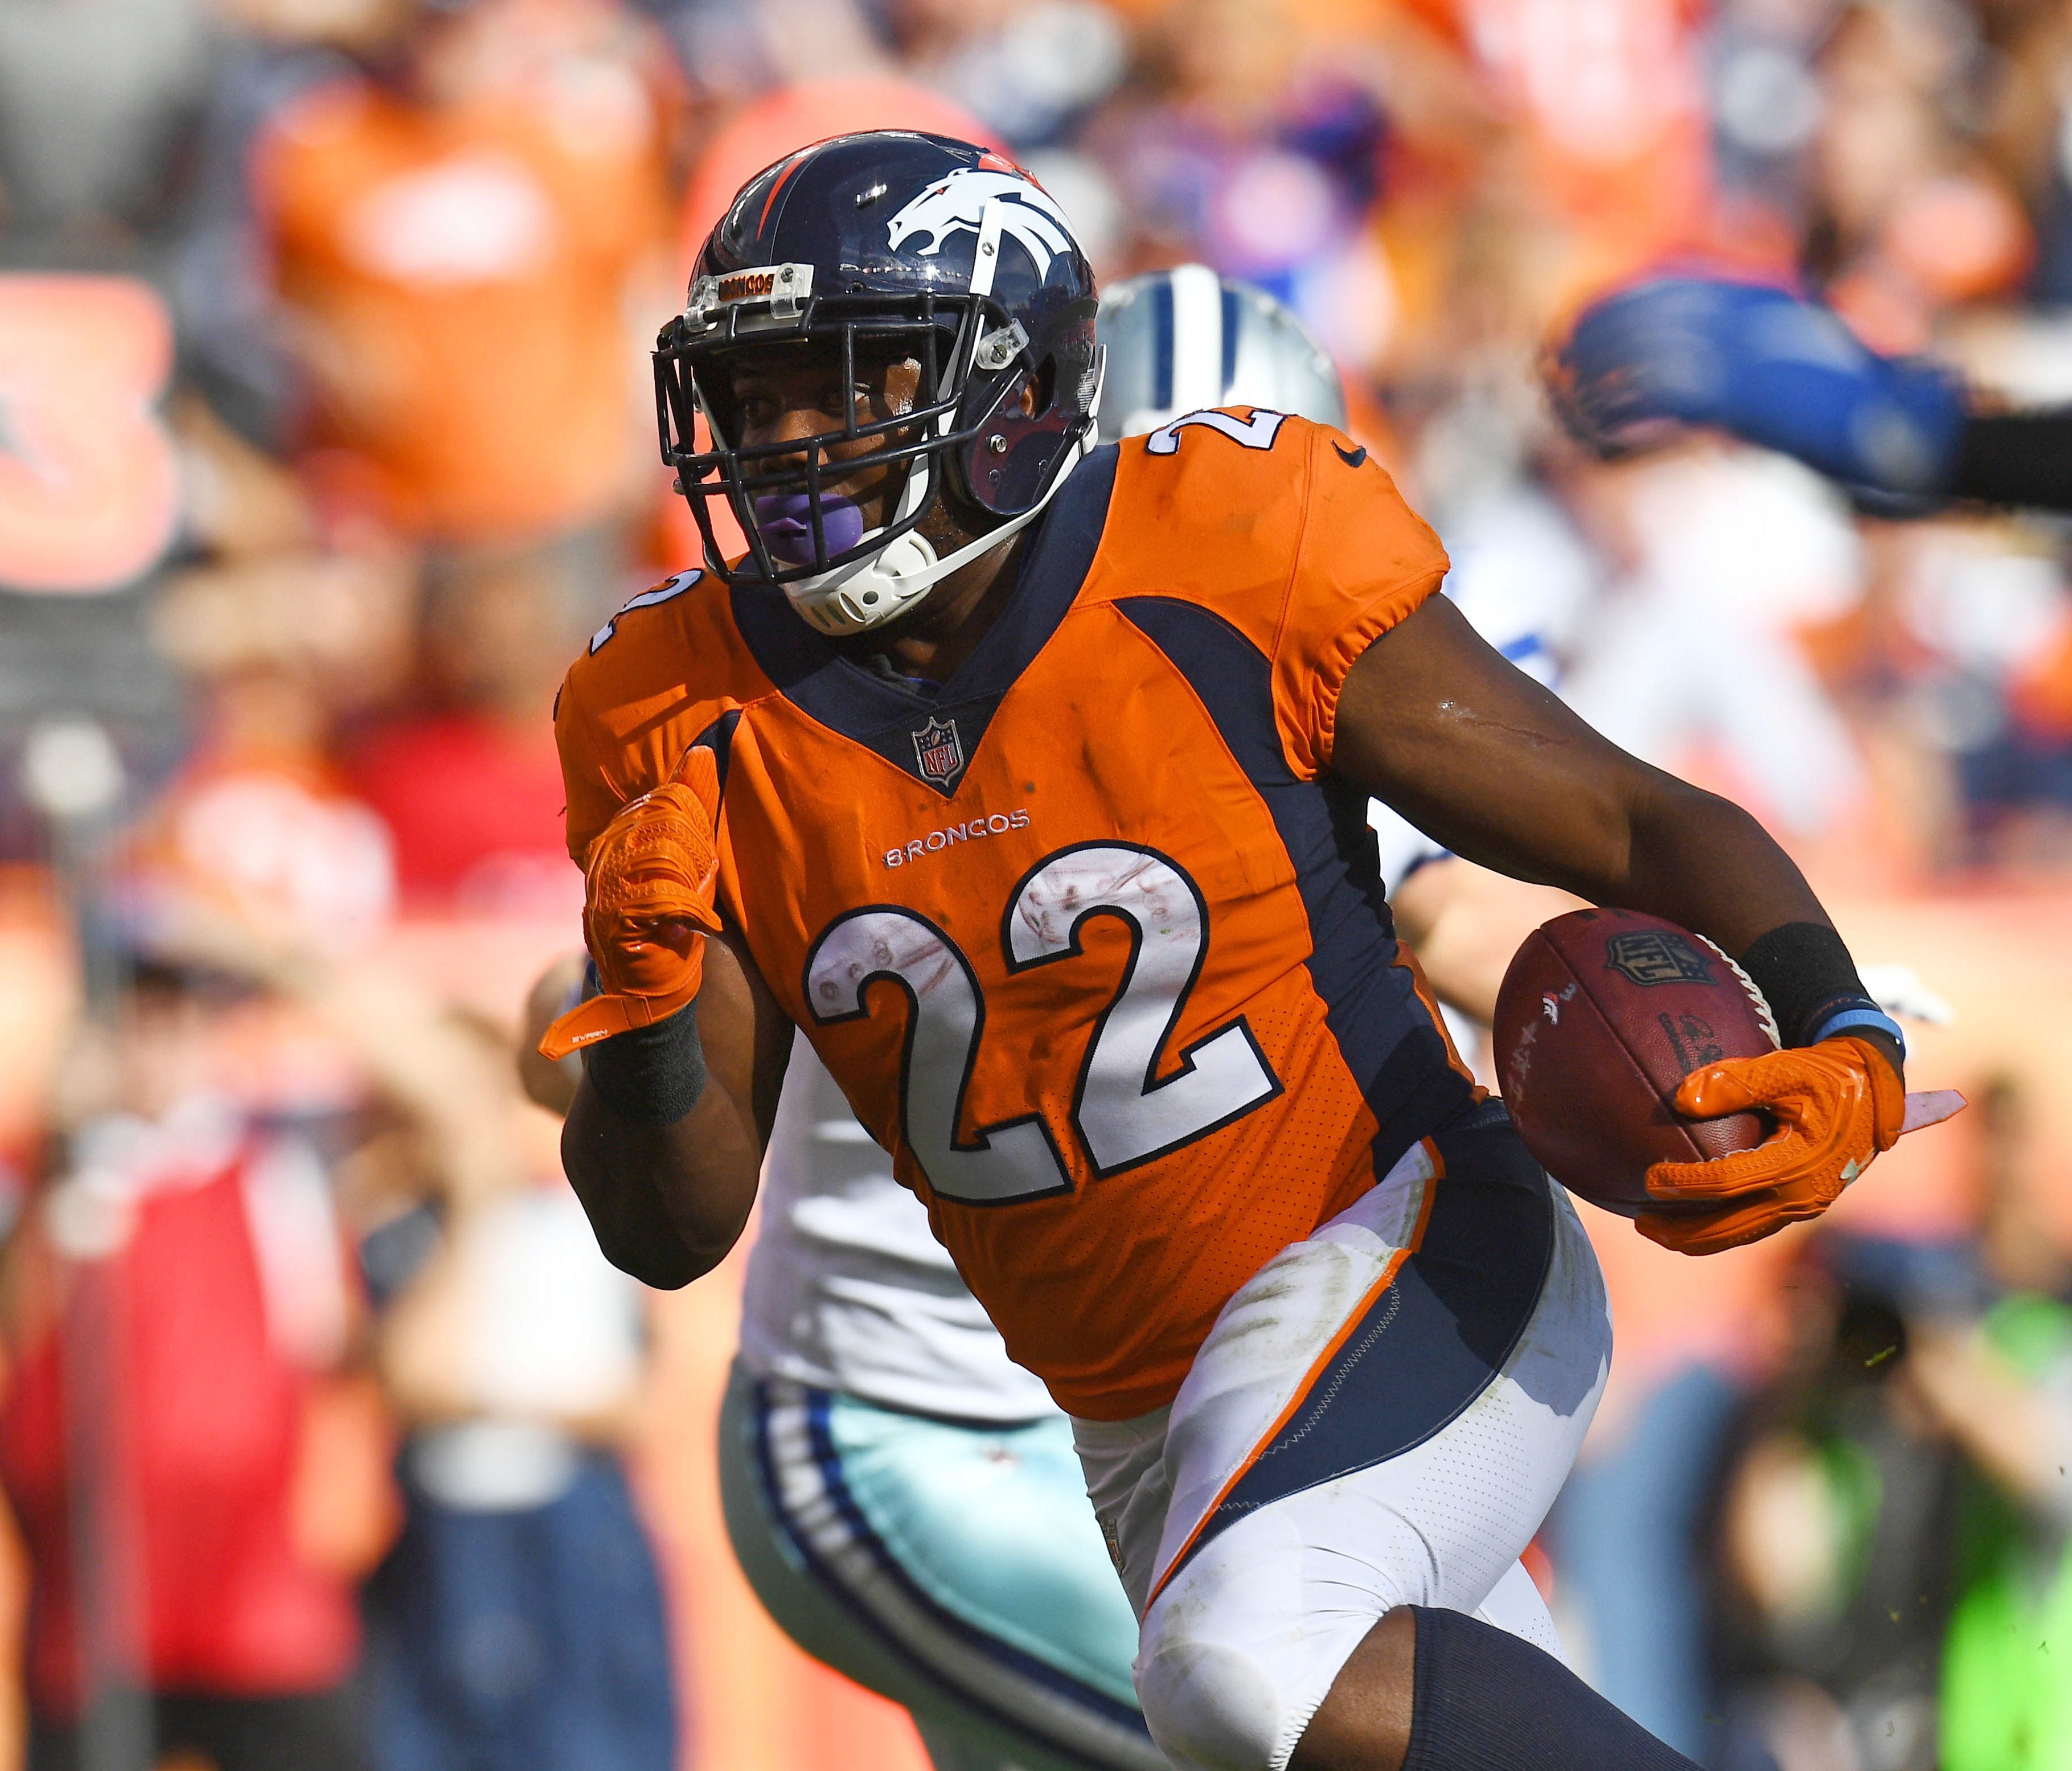 Denver Broncos running back C.J. Anderson (22) carries the ball in the second quarter against the Denver Broncos at Sports Authority Field at Mile High.